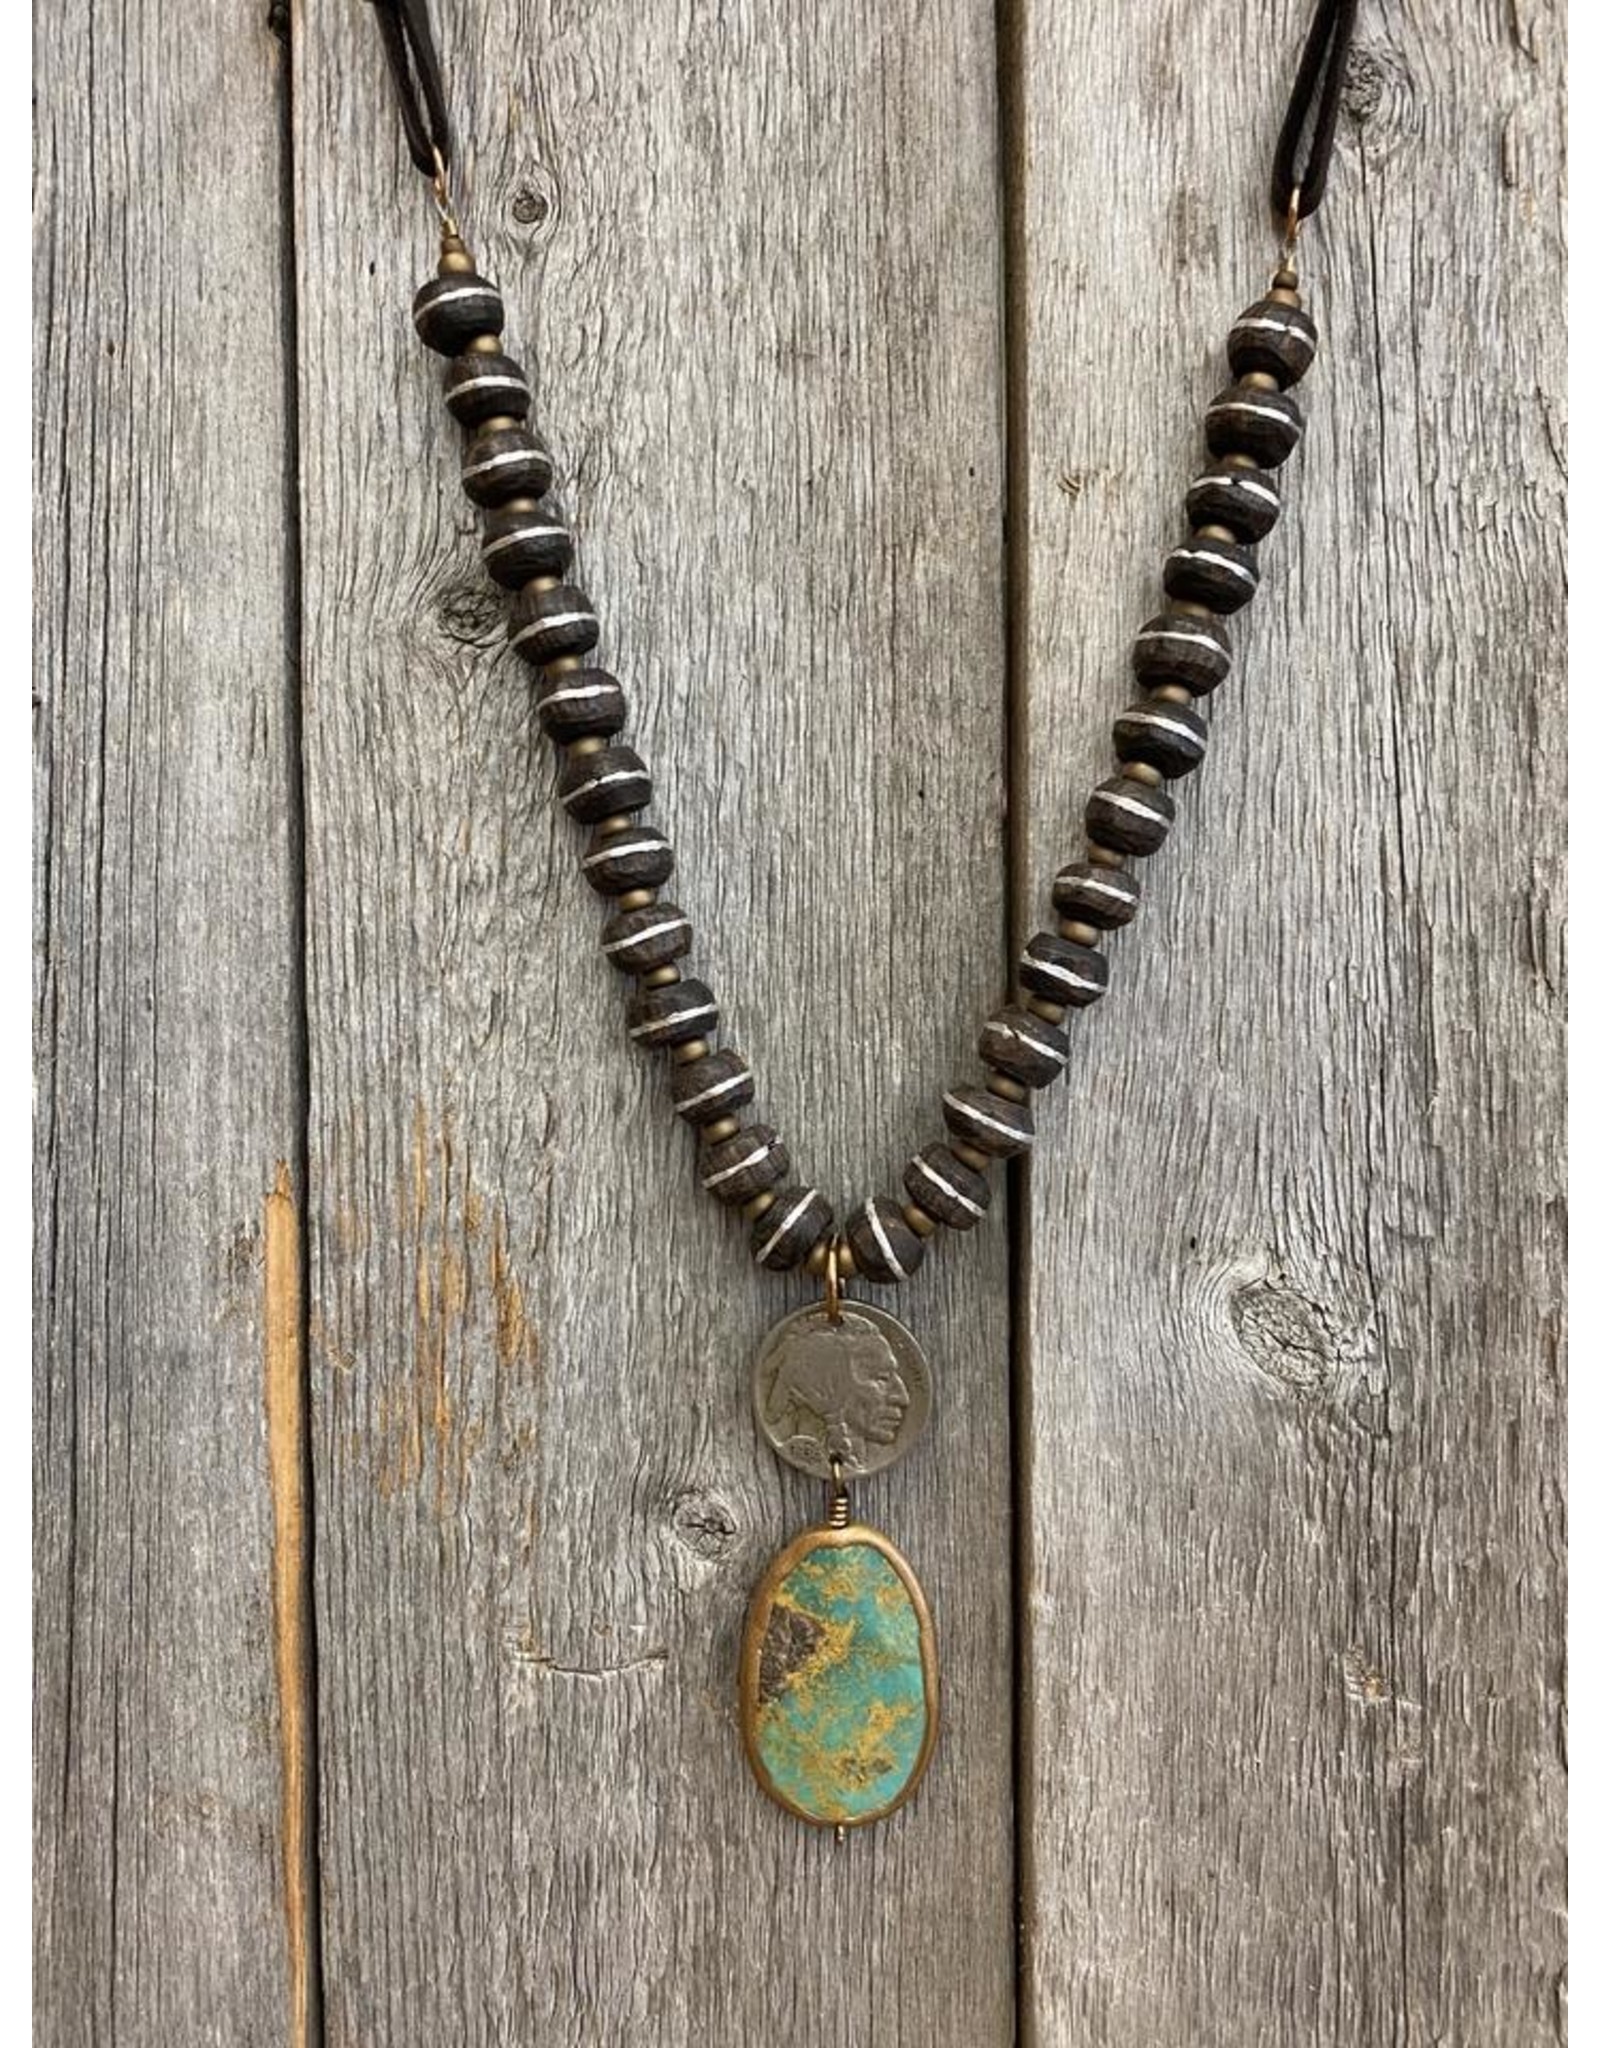 J. Forks Wood Necklace with Buffalo Nickel and Turquoise Slab Drop